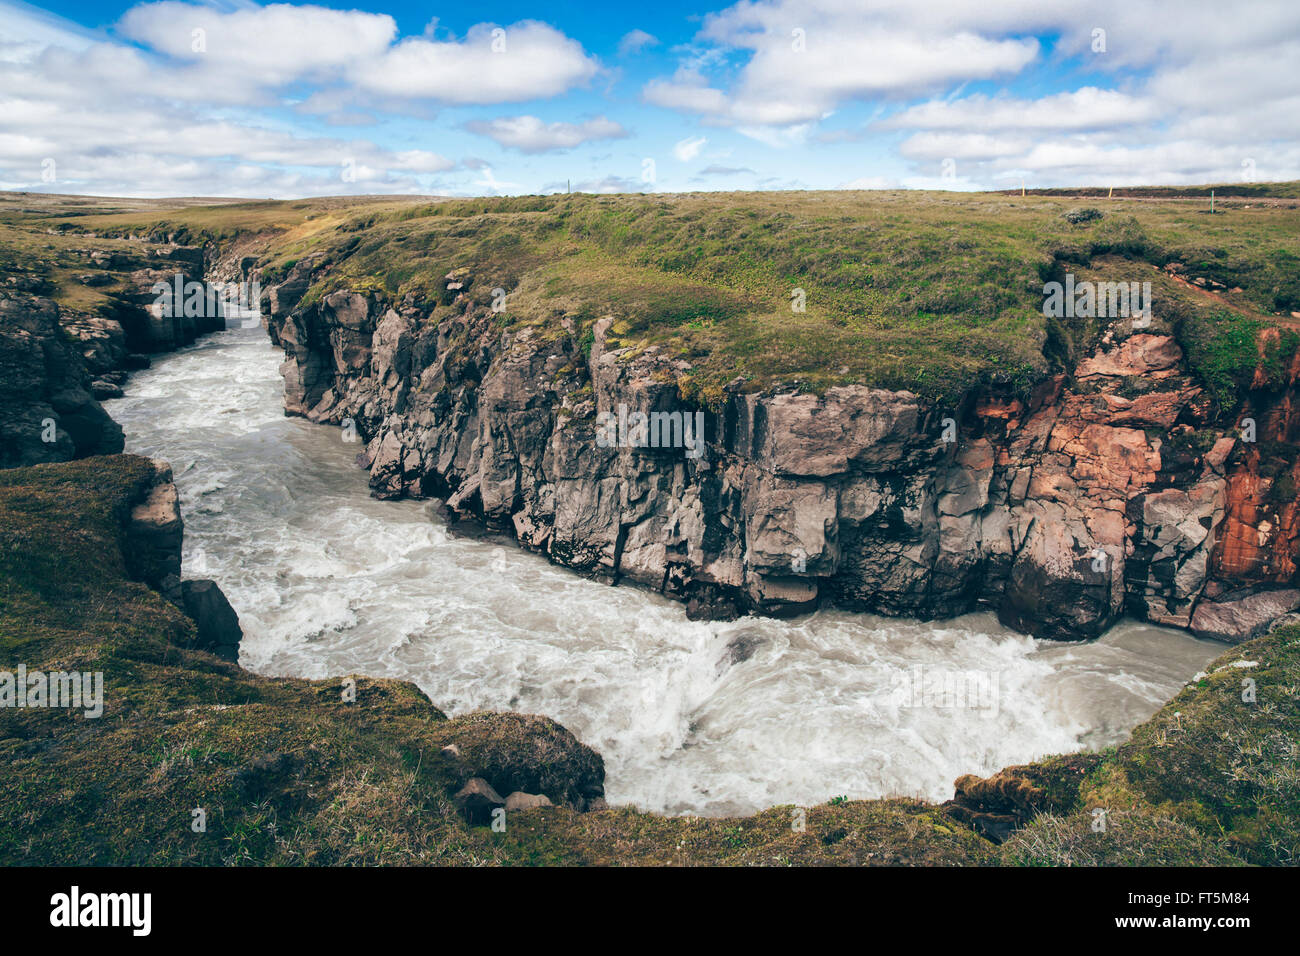 Icelandic landscape with river Stock Photo